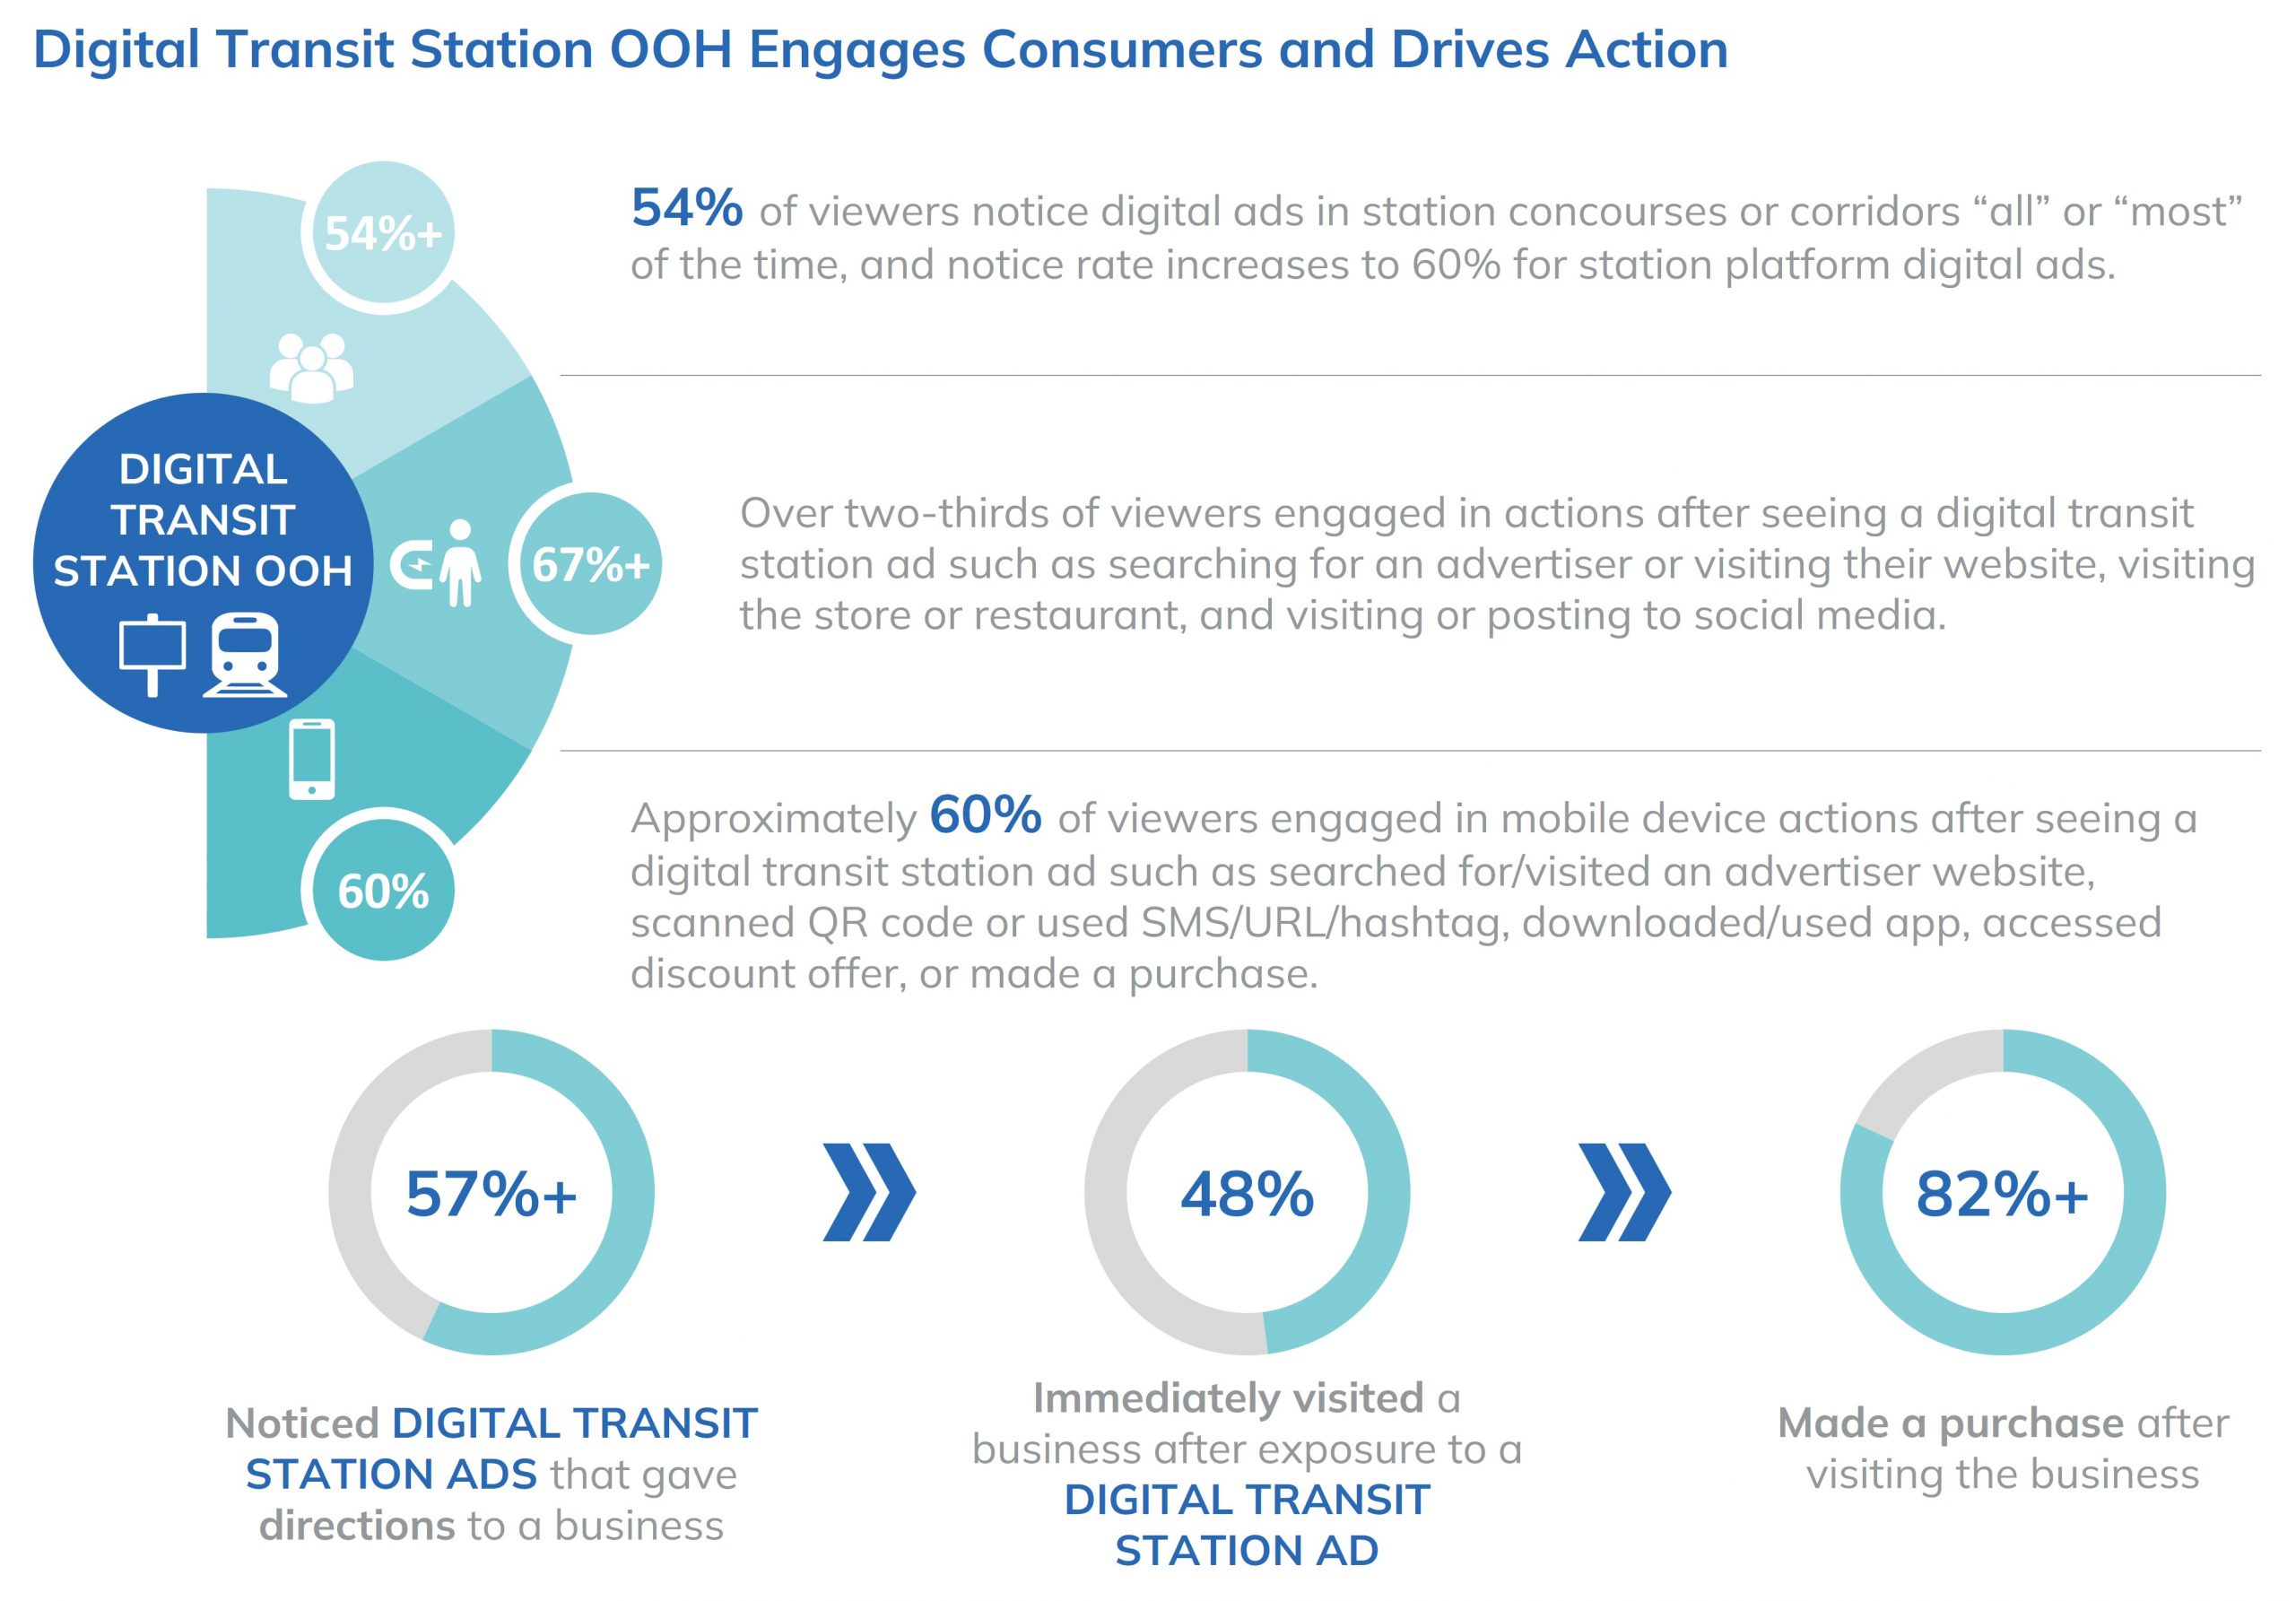 Percentage of consumers that notice Digital Airport OOH ads